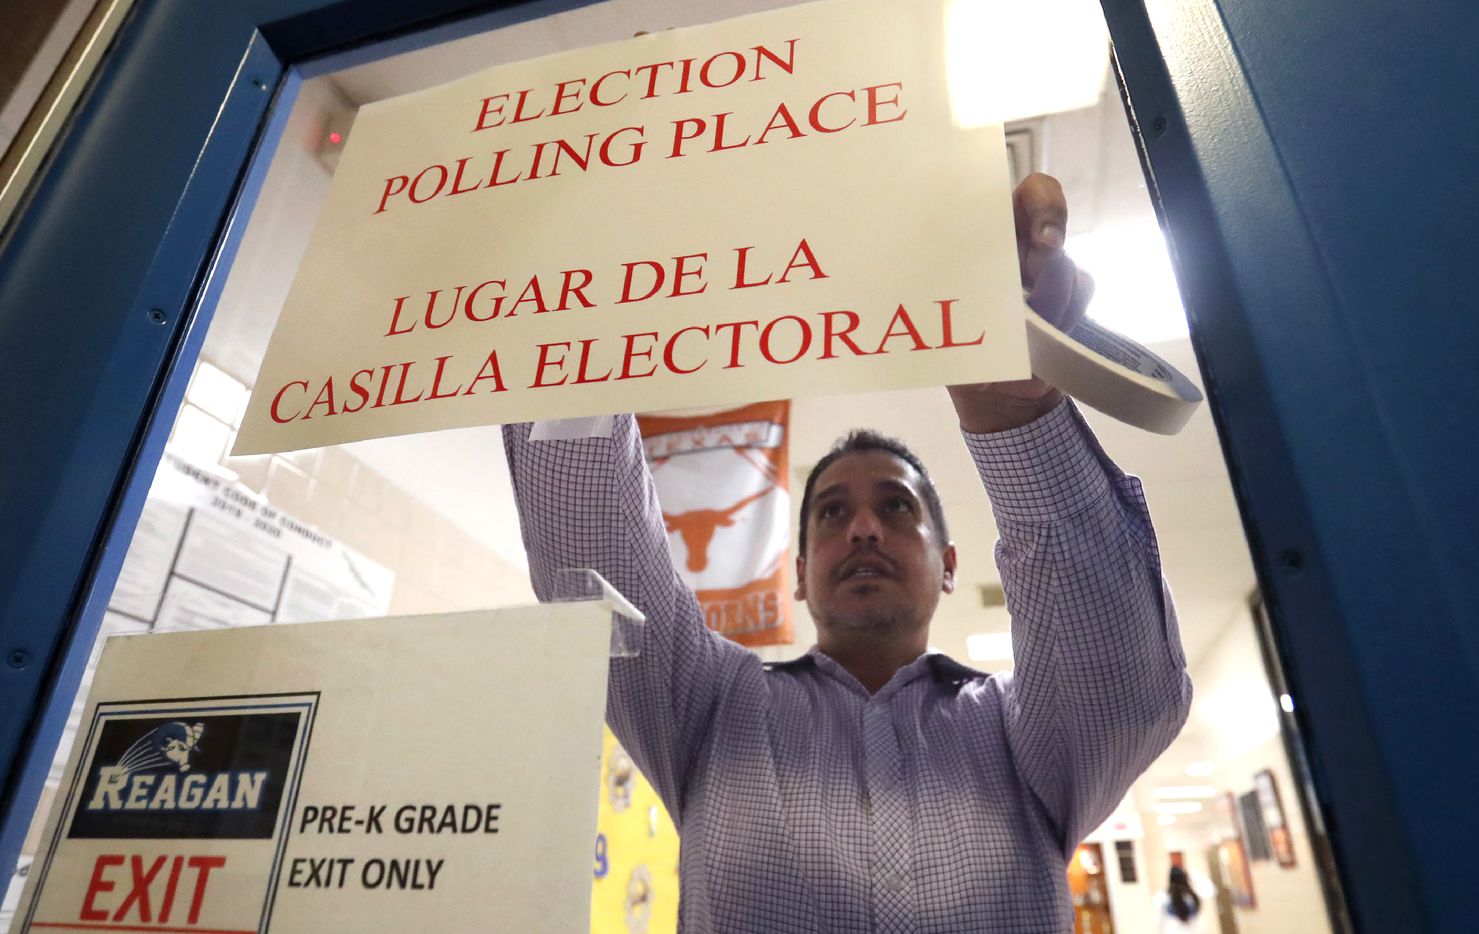 Dallas County election worker Maxx Nunez tapes up a sign before polls open for Super Tuesday voting at John H. Reagan Elementary School in the Oak Cliff section of Dallas, Tuesday, March 3, 2020.